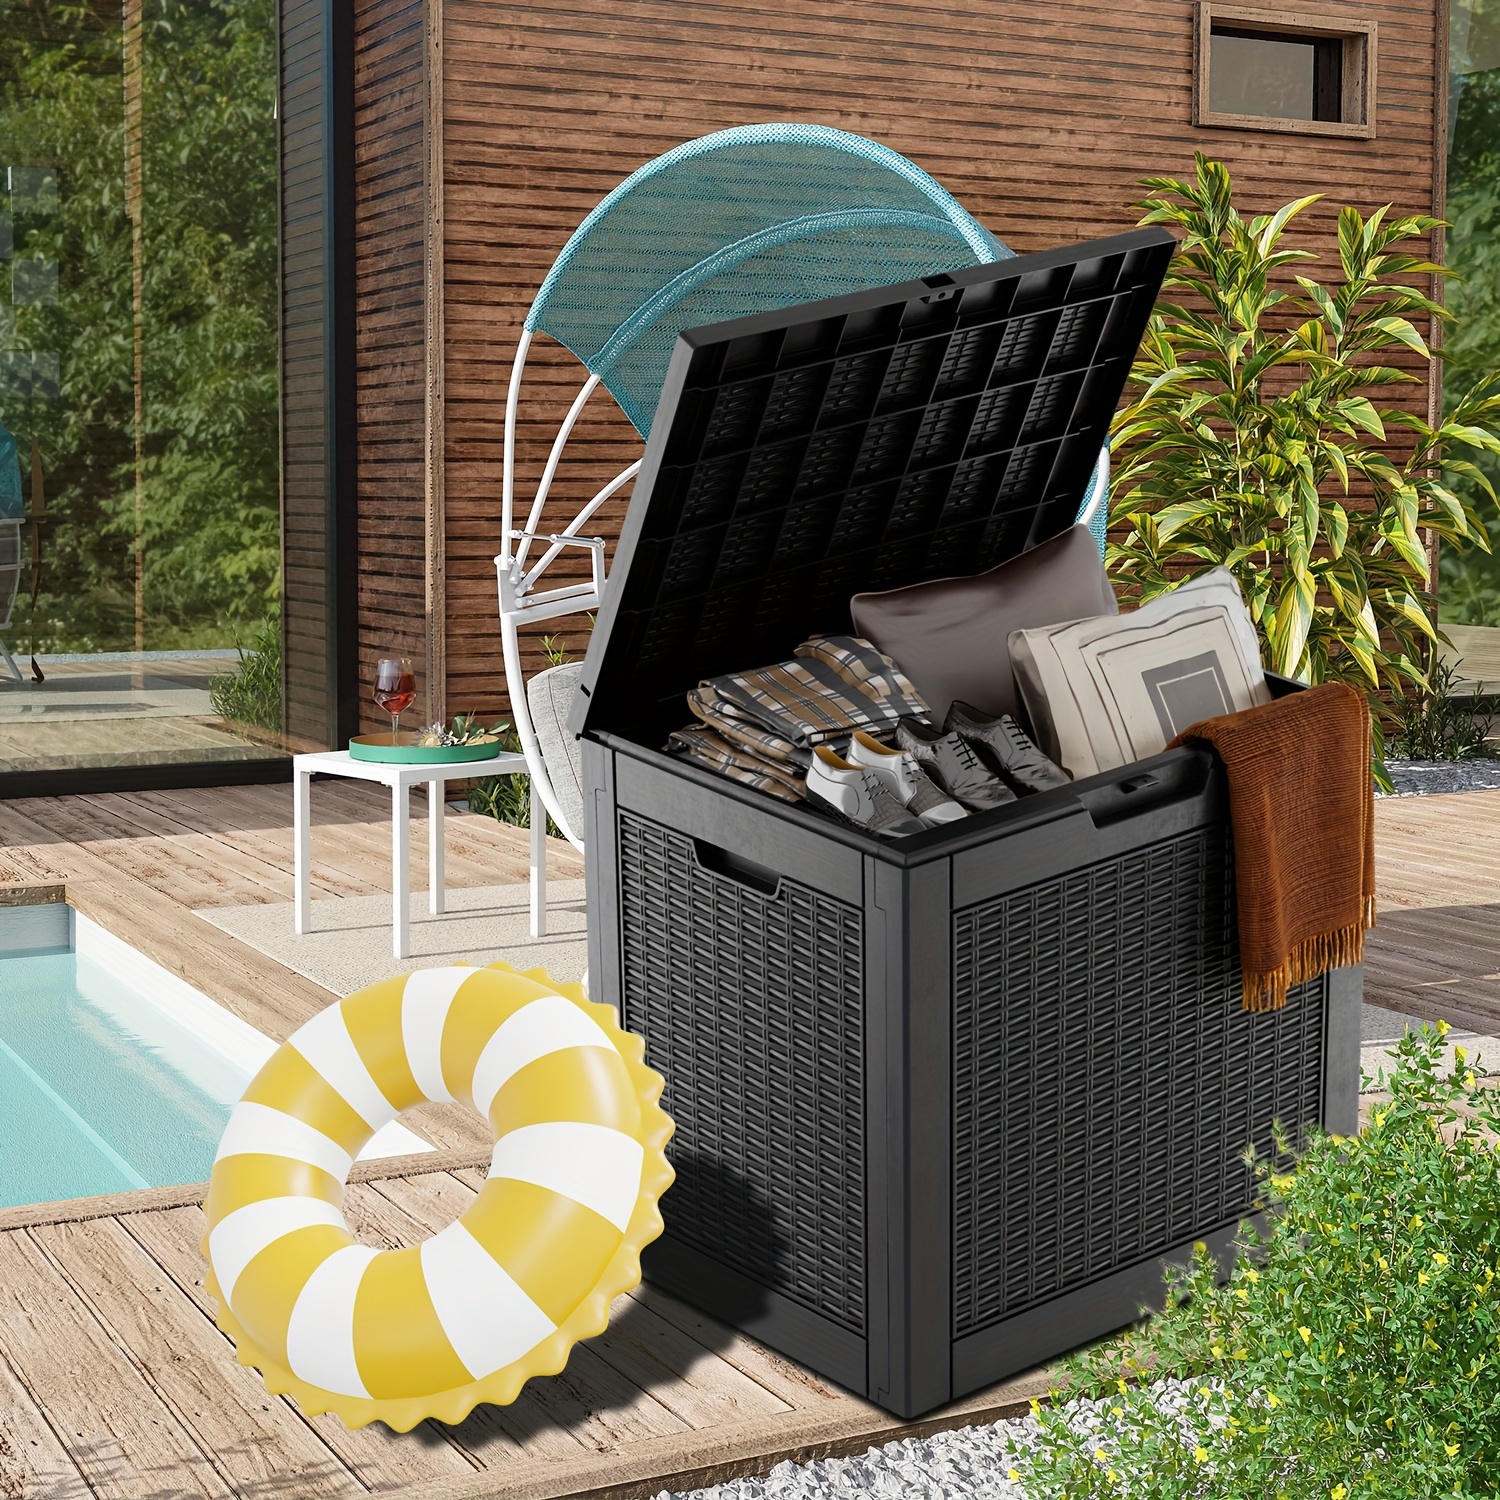 

30 Gallon Rattan Durable Patio Storage Bin, Indoor And Outdoor Water And Sun Protection, Ideal For Storing Indoor And Outdoor Patio Furniture Mats, Outdoor Toys, Pool Accessories, And Beach Towels.